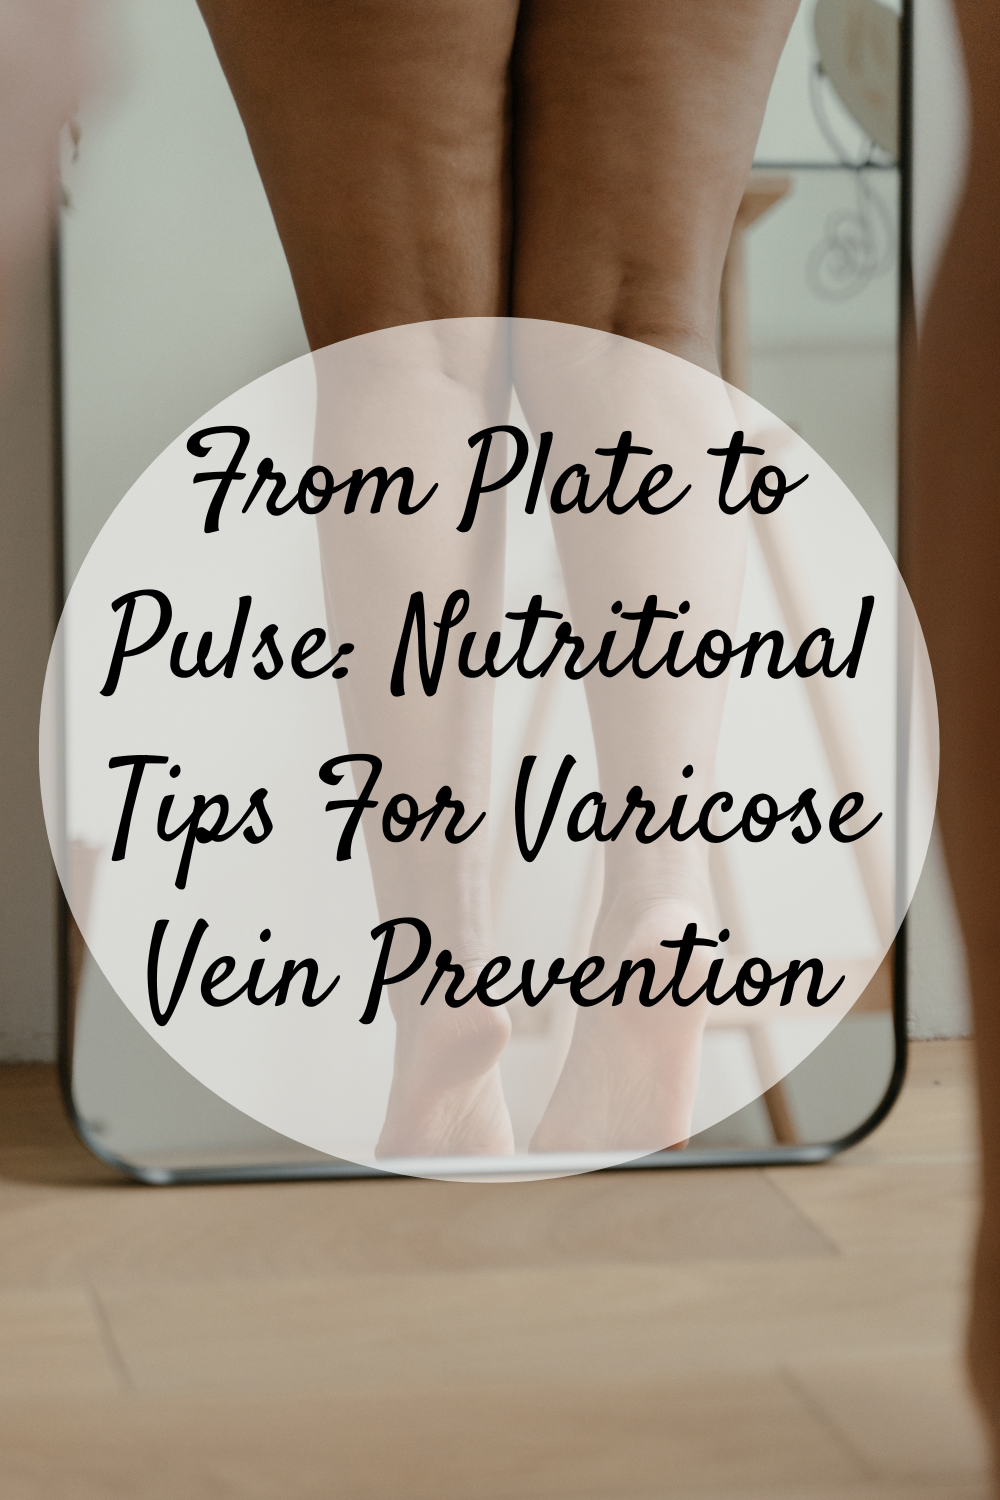 From Plate to Pulse: Nutritional Tips For Varicose Vein Prevention ...